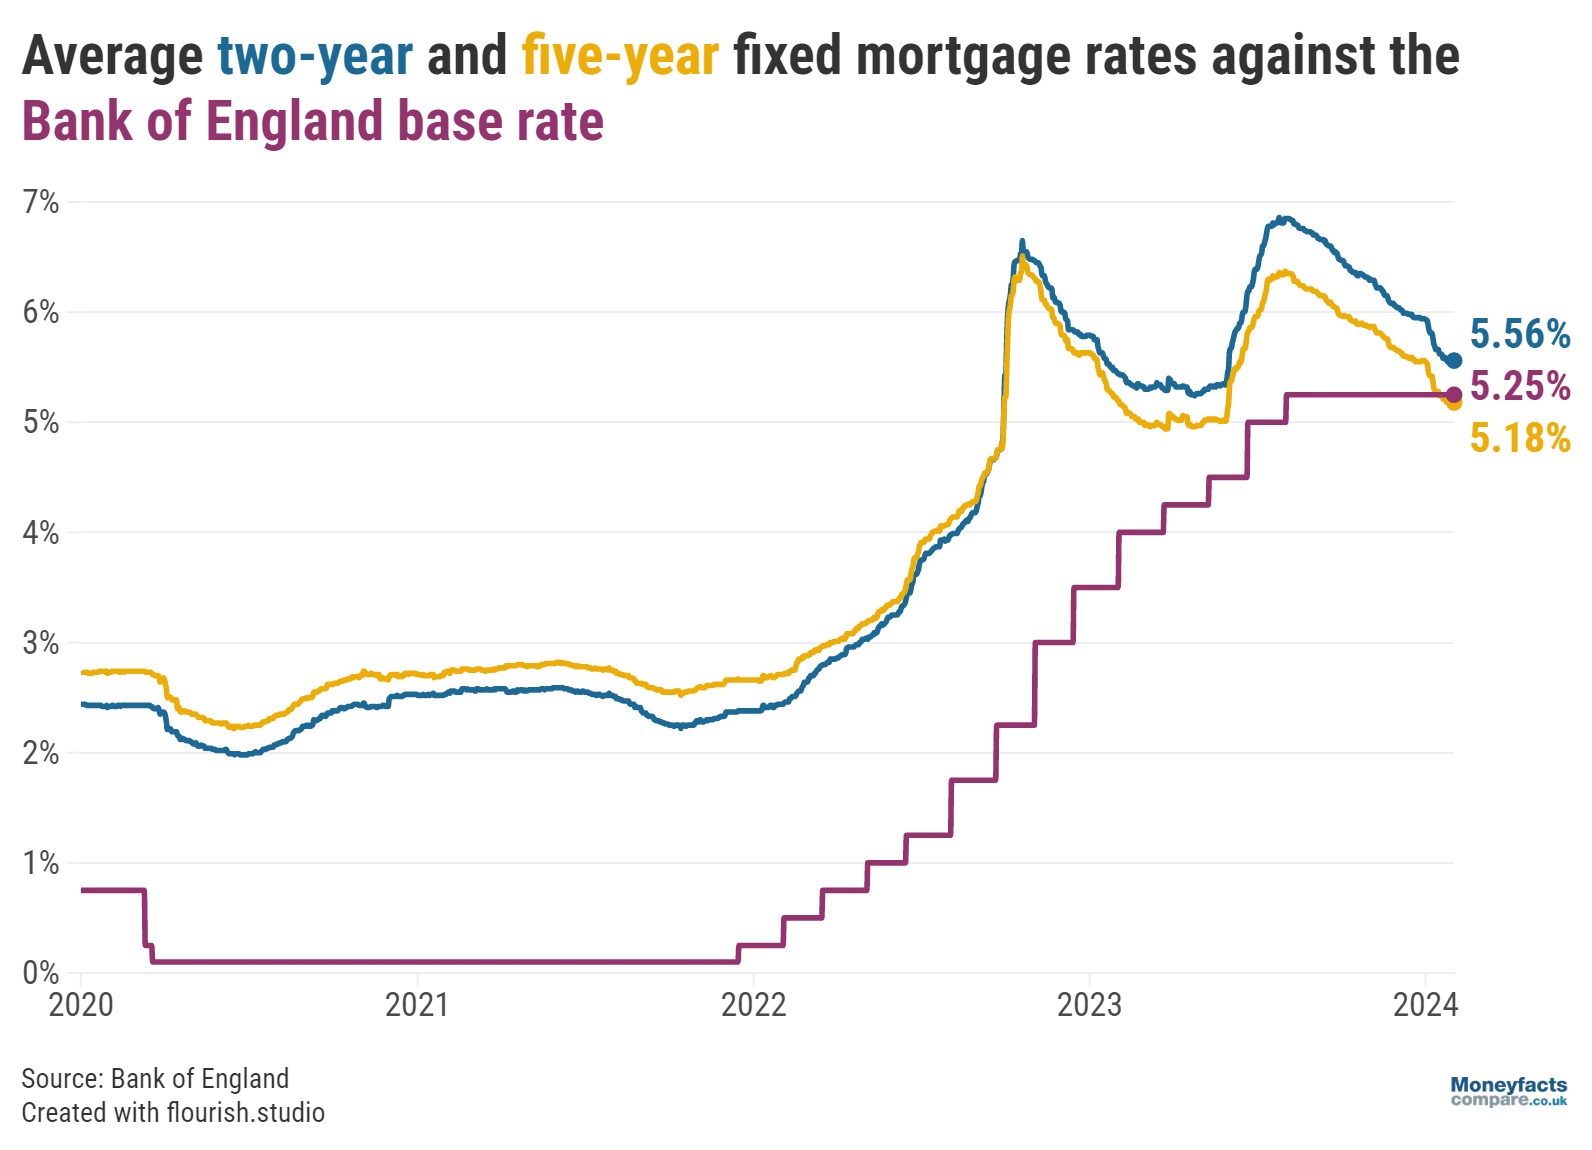 Base rate compared to average mortgage rates - February 2024